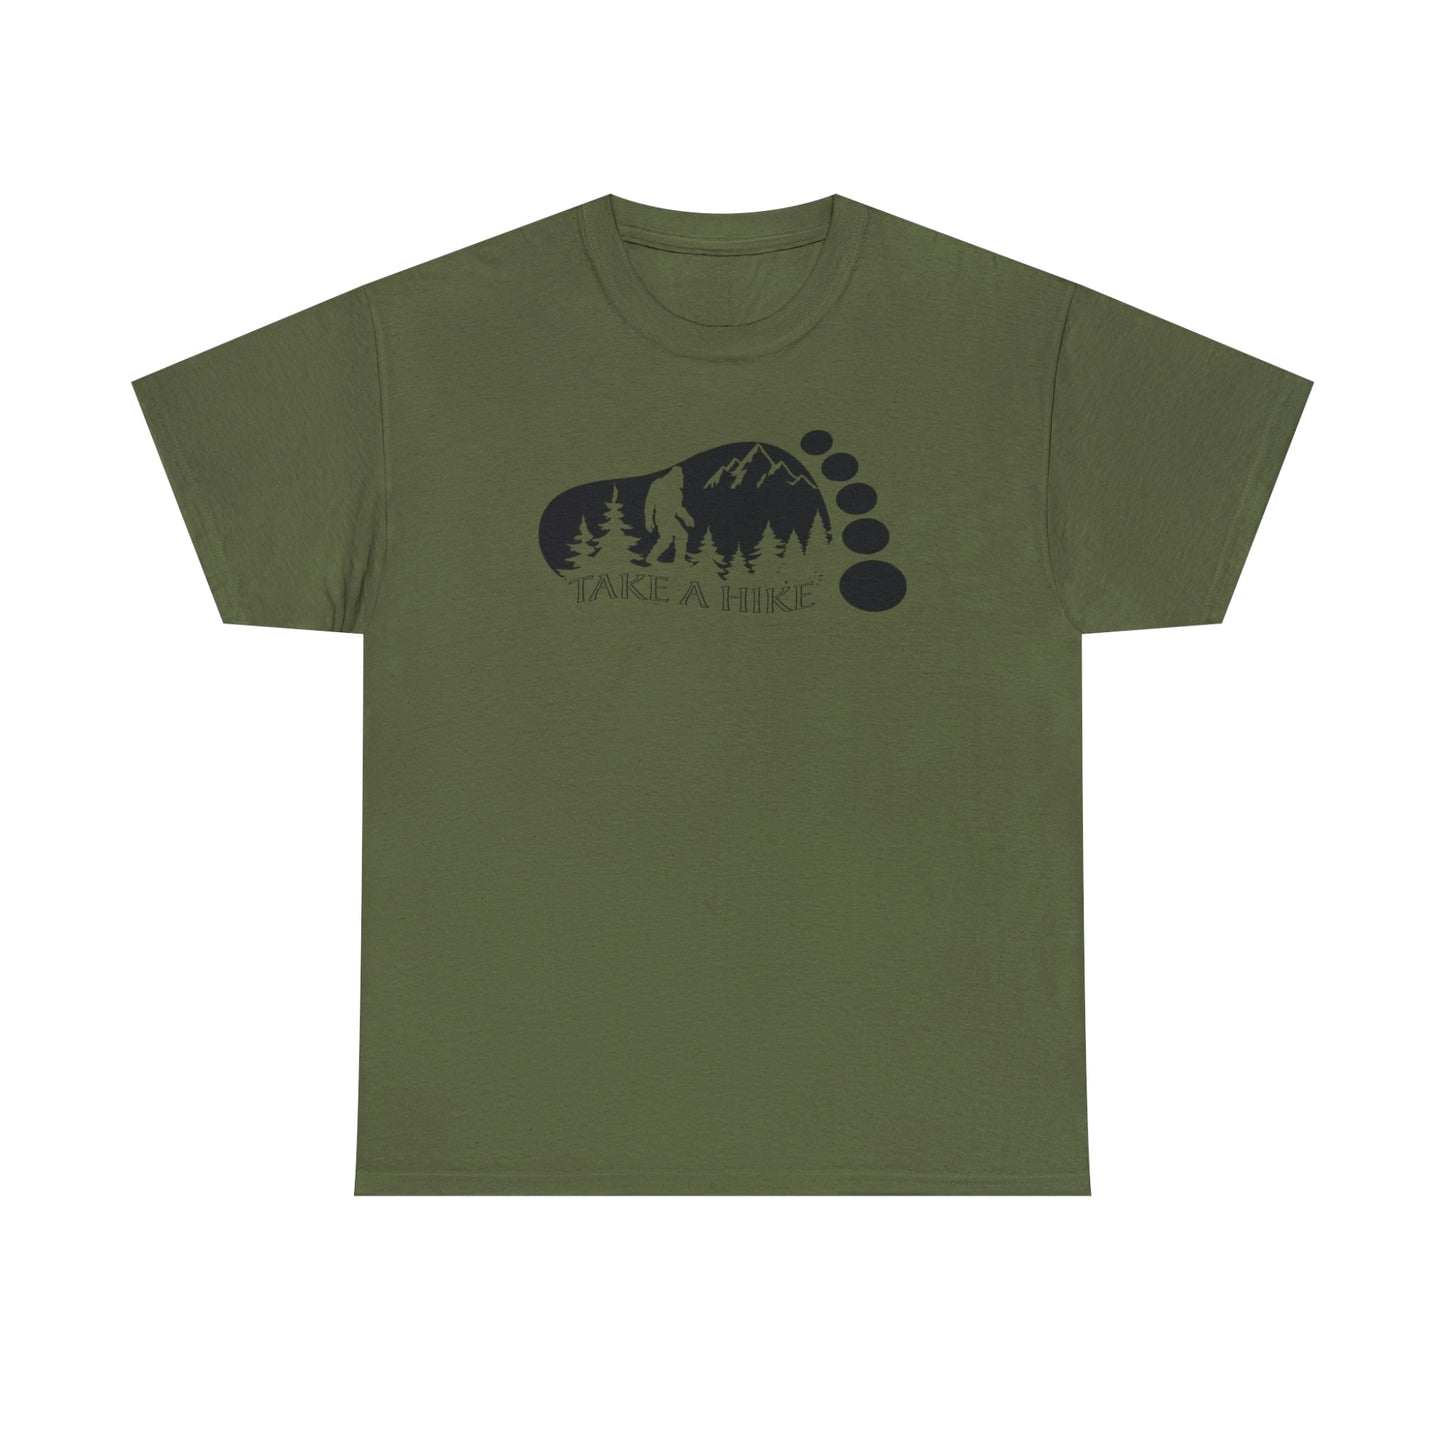 Bigfoot T-Shirt For Hiking TShirt For Outdoor Adventure T Shirt For Trekking Shirt For Hikers T-Shirt For Bigfoot Lovers Gift for Hiker Gift